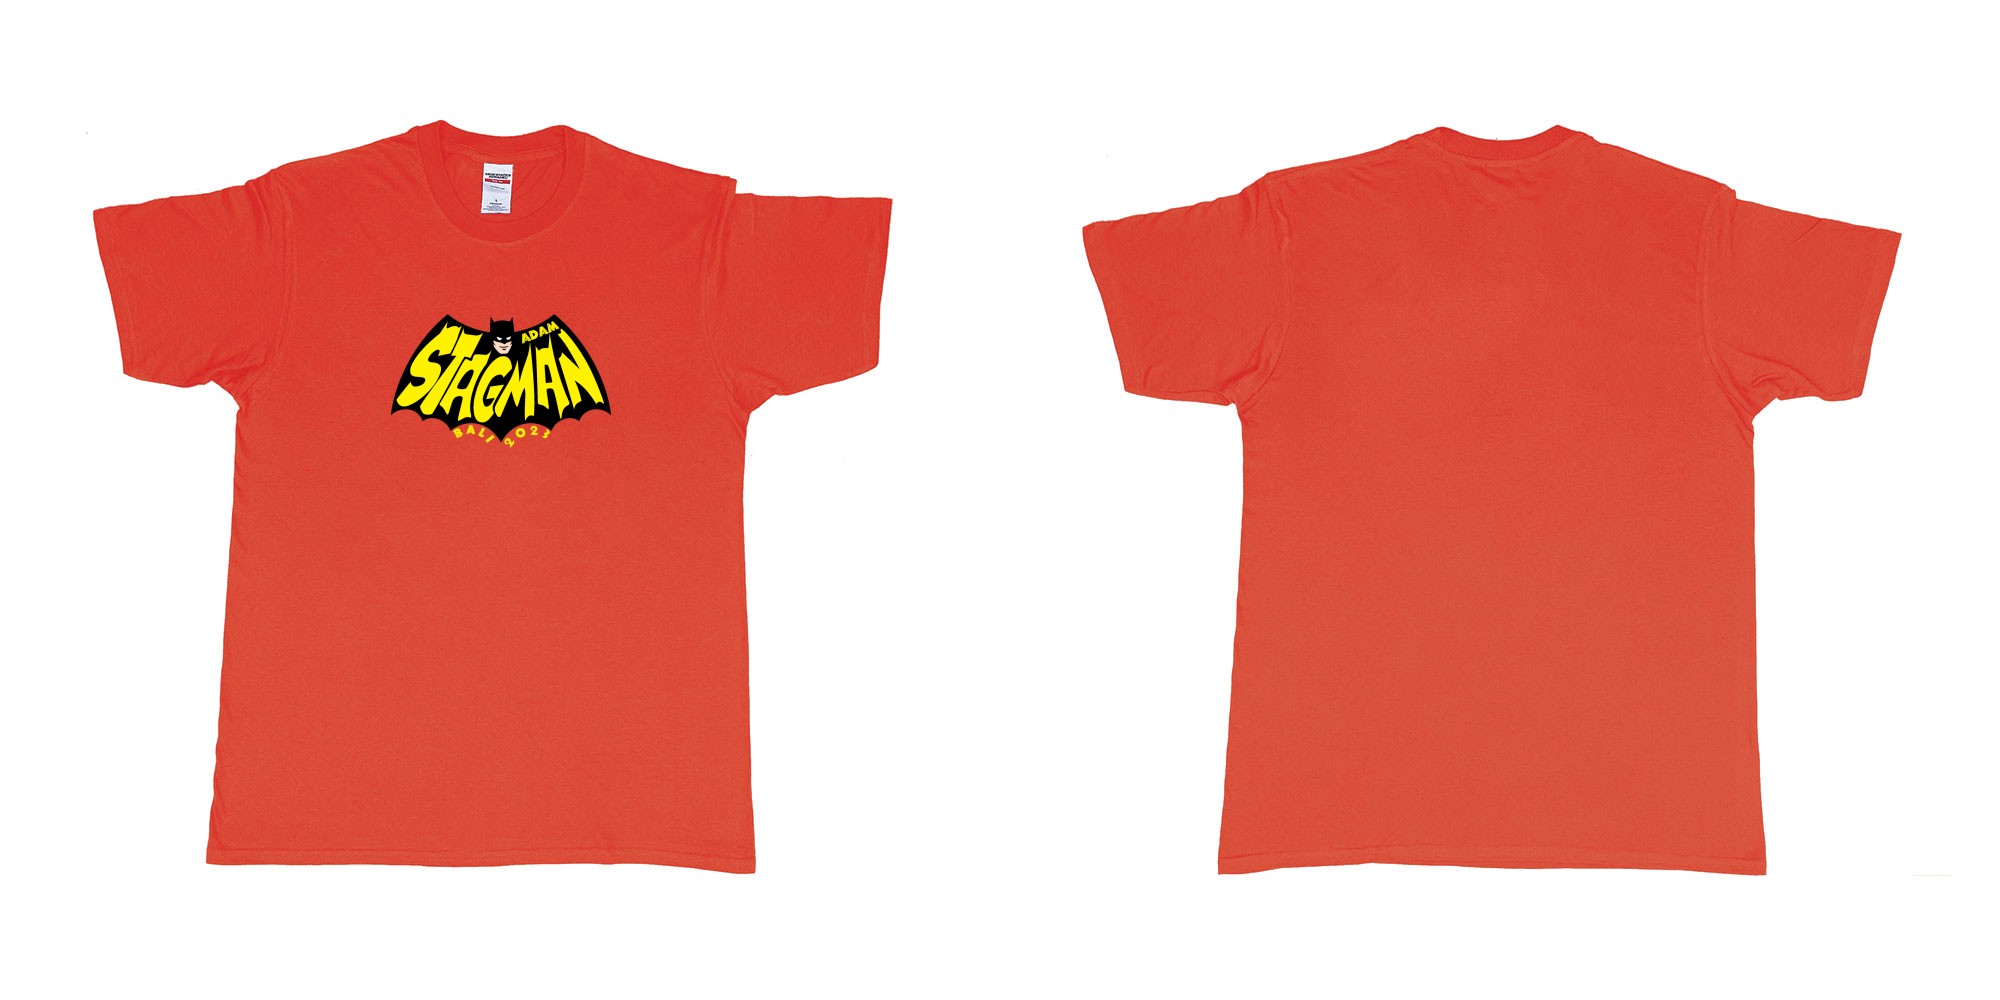 Custom tshirt design Batman StagMan Old School in fabric color red choice your own text made in Bali by The Pirate Way